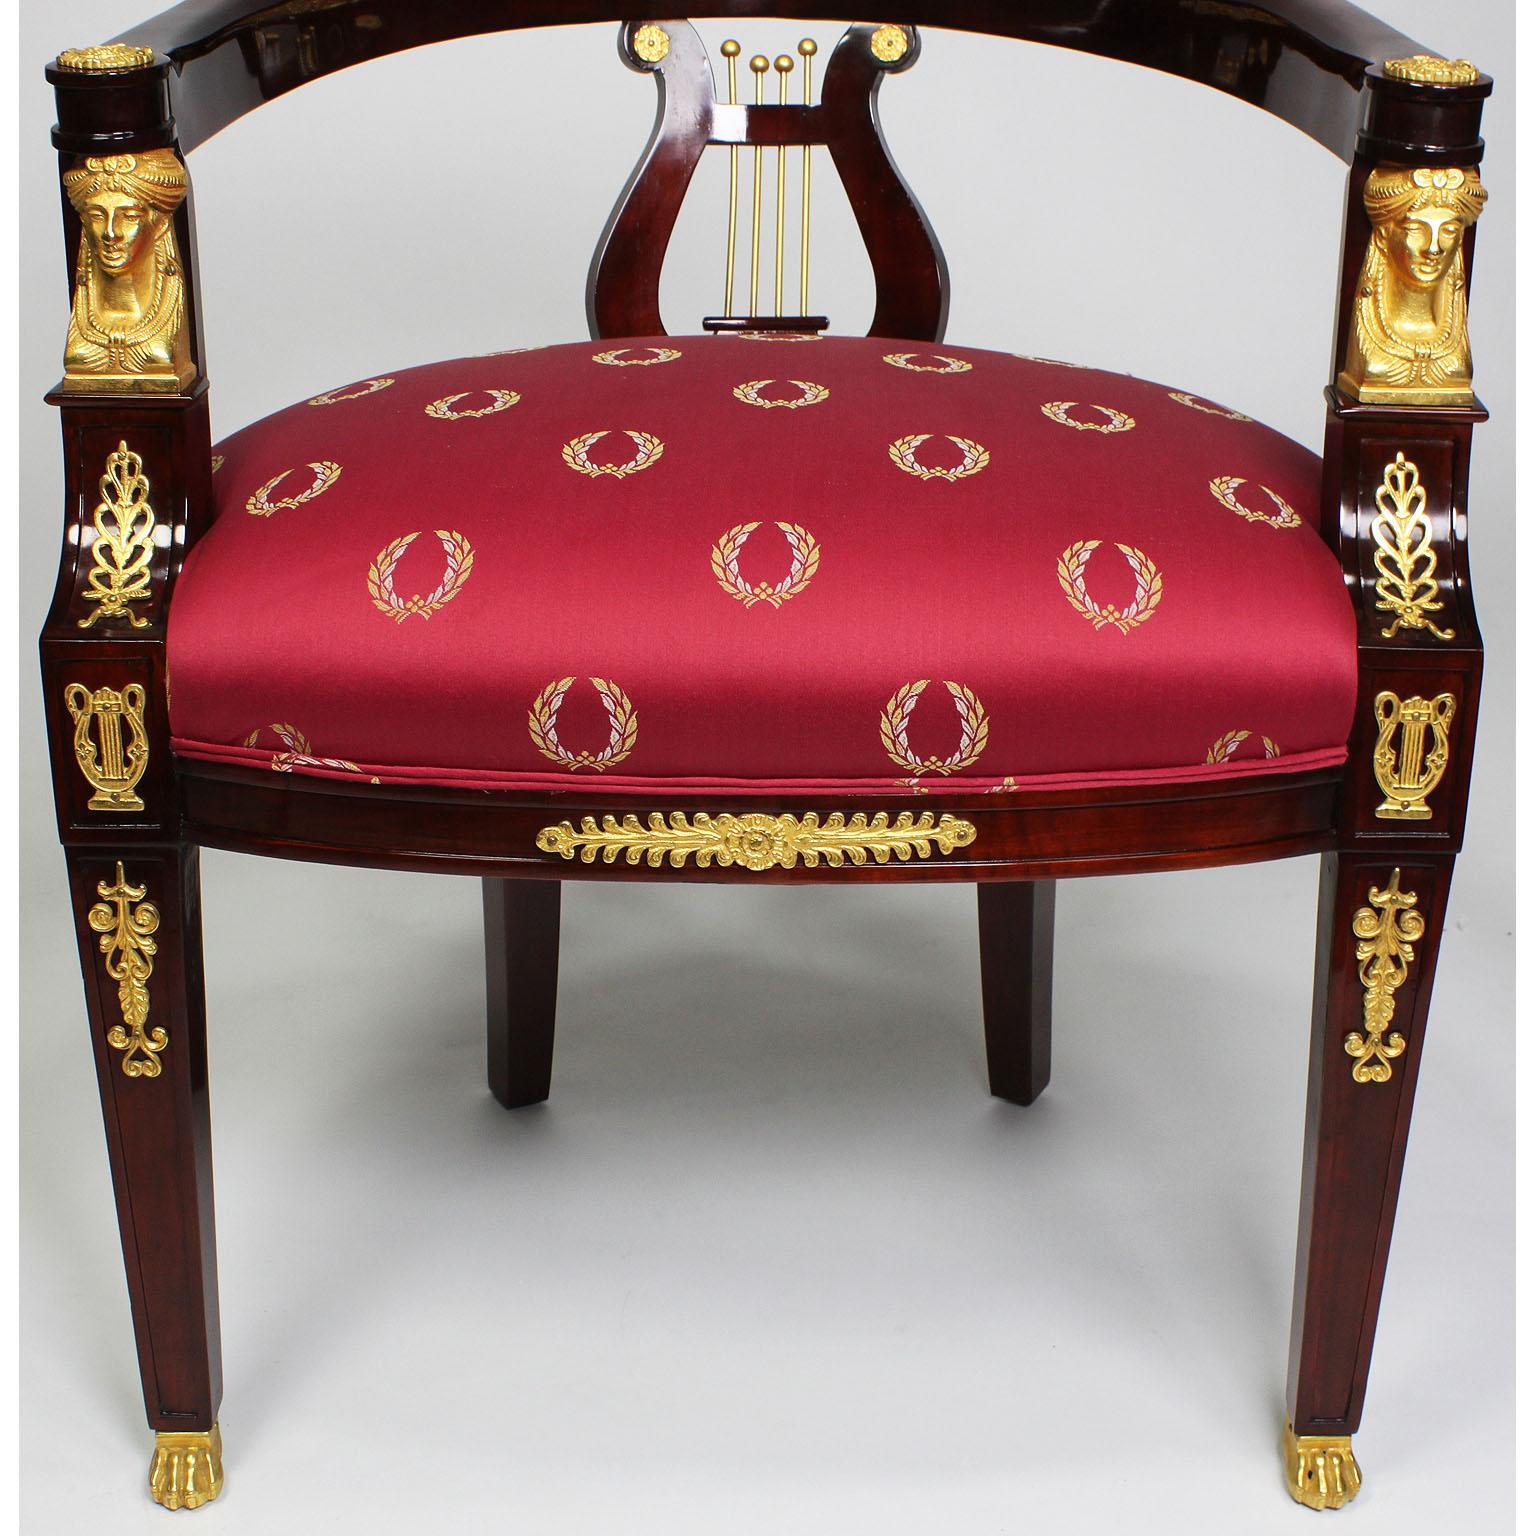 A Pair of French Empire Revival Style Mahogany & Gilt-Bronze Mounted Game Chairs For Sale 1